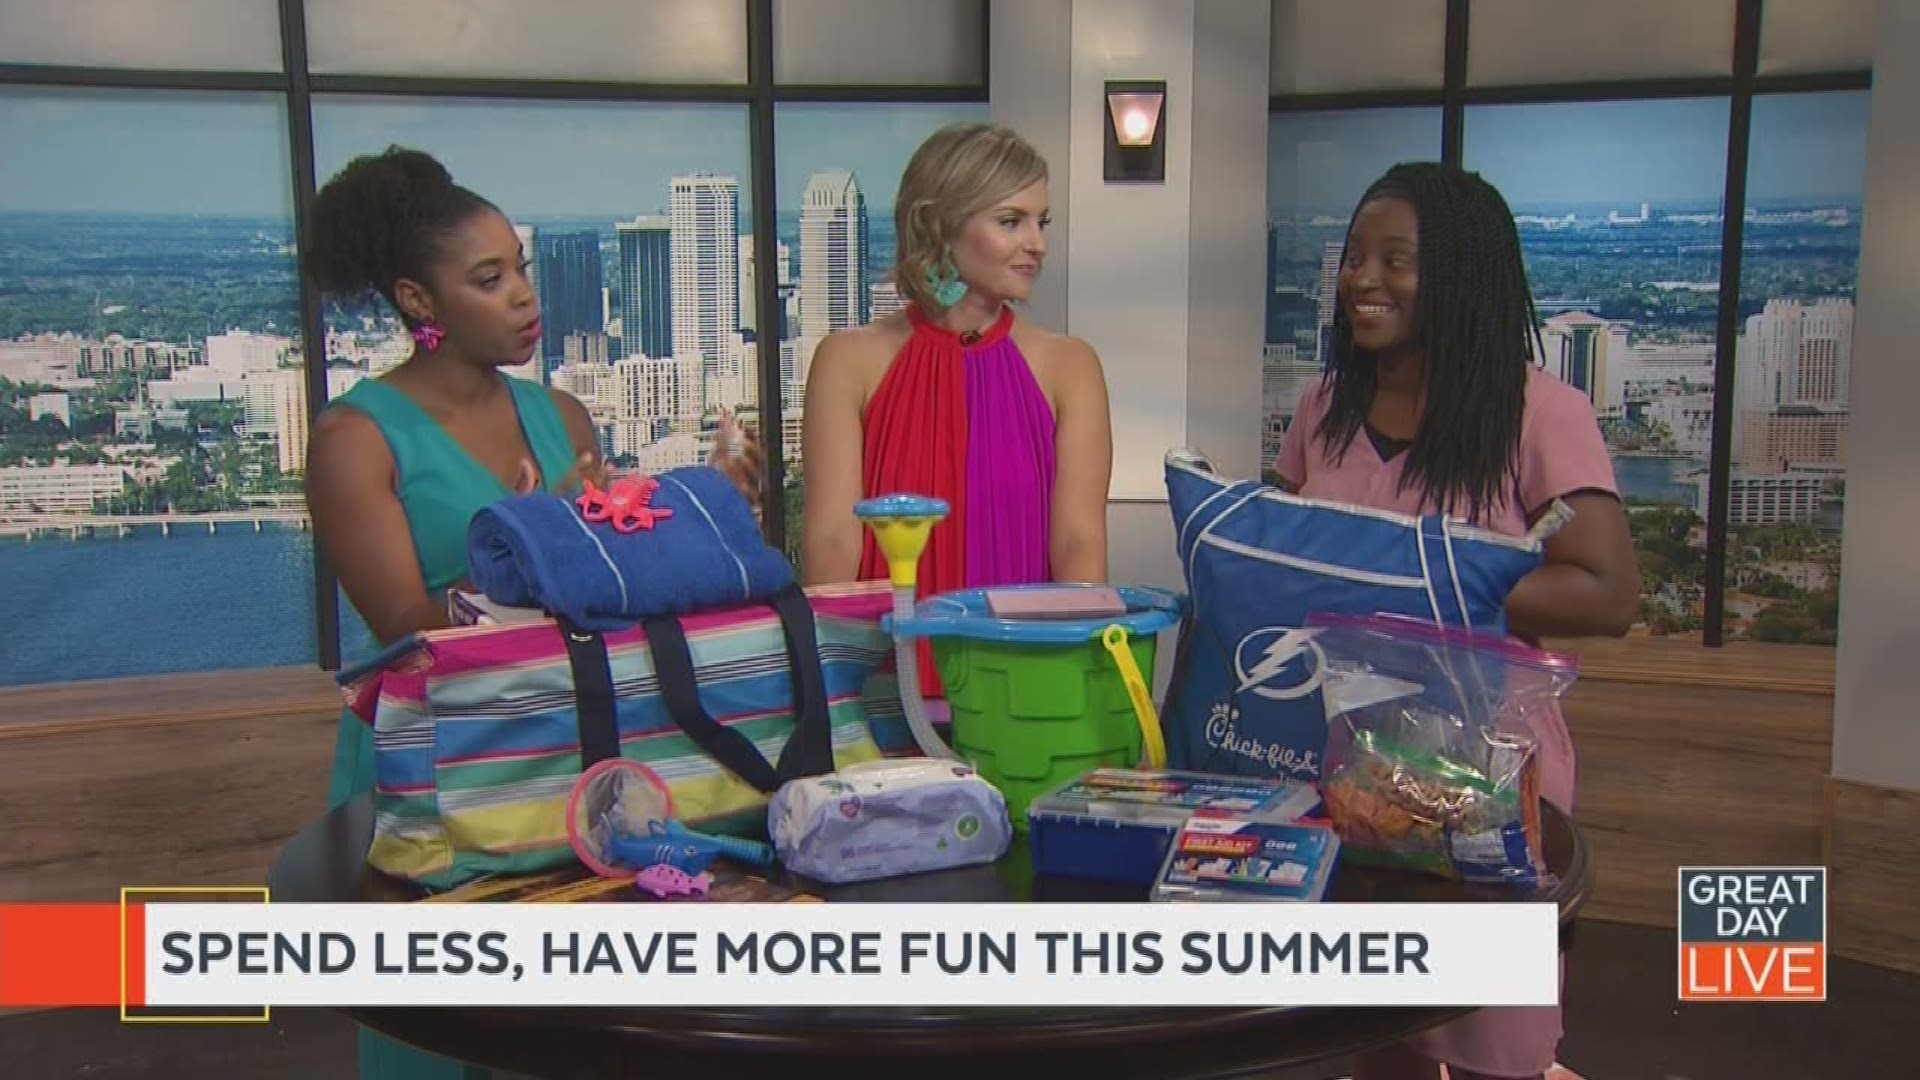 If you’re already at a loss of what to do with  your kids this summer, Miriam Cook from Family Friendly Tampa Bay dropped by to give us tips. From the Rays to the Rowdies, from bowling to movies, there are deals all around town families can take advantage of so they’re having lots of fun, without spending lots of money. For all these great deals go to familyfriendlytampabay.com.